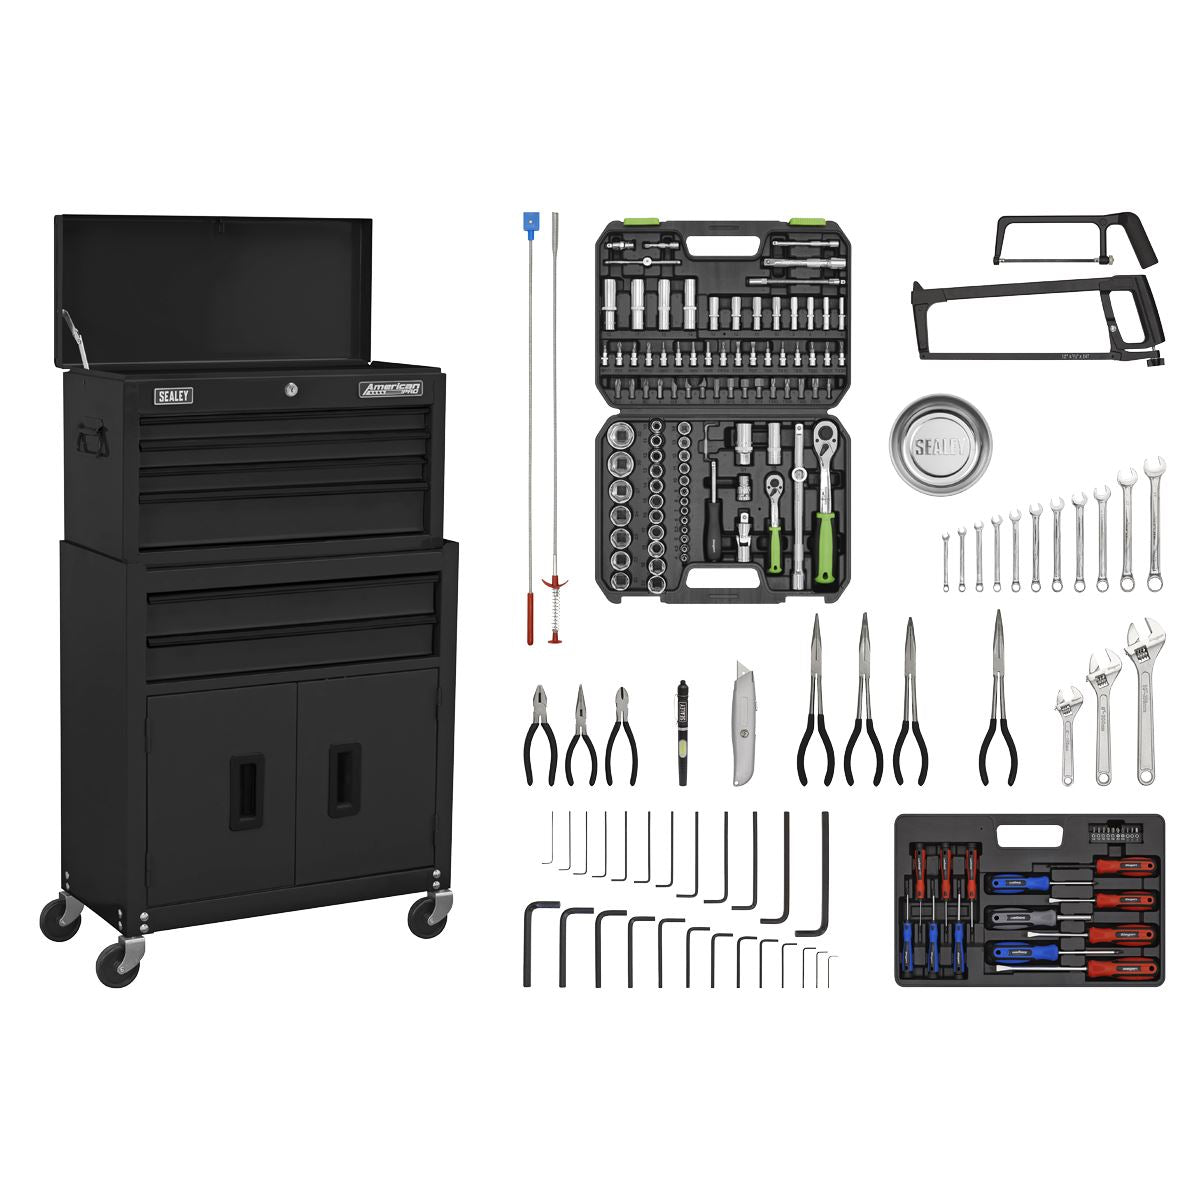 Sealey American Pro Topchest & Rollcab Combination 6 Drawer with Ball-Bearing Slides - Black & 170pc Tool Kit